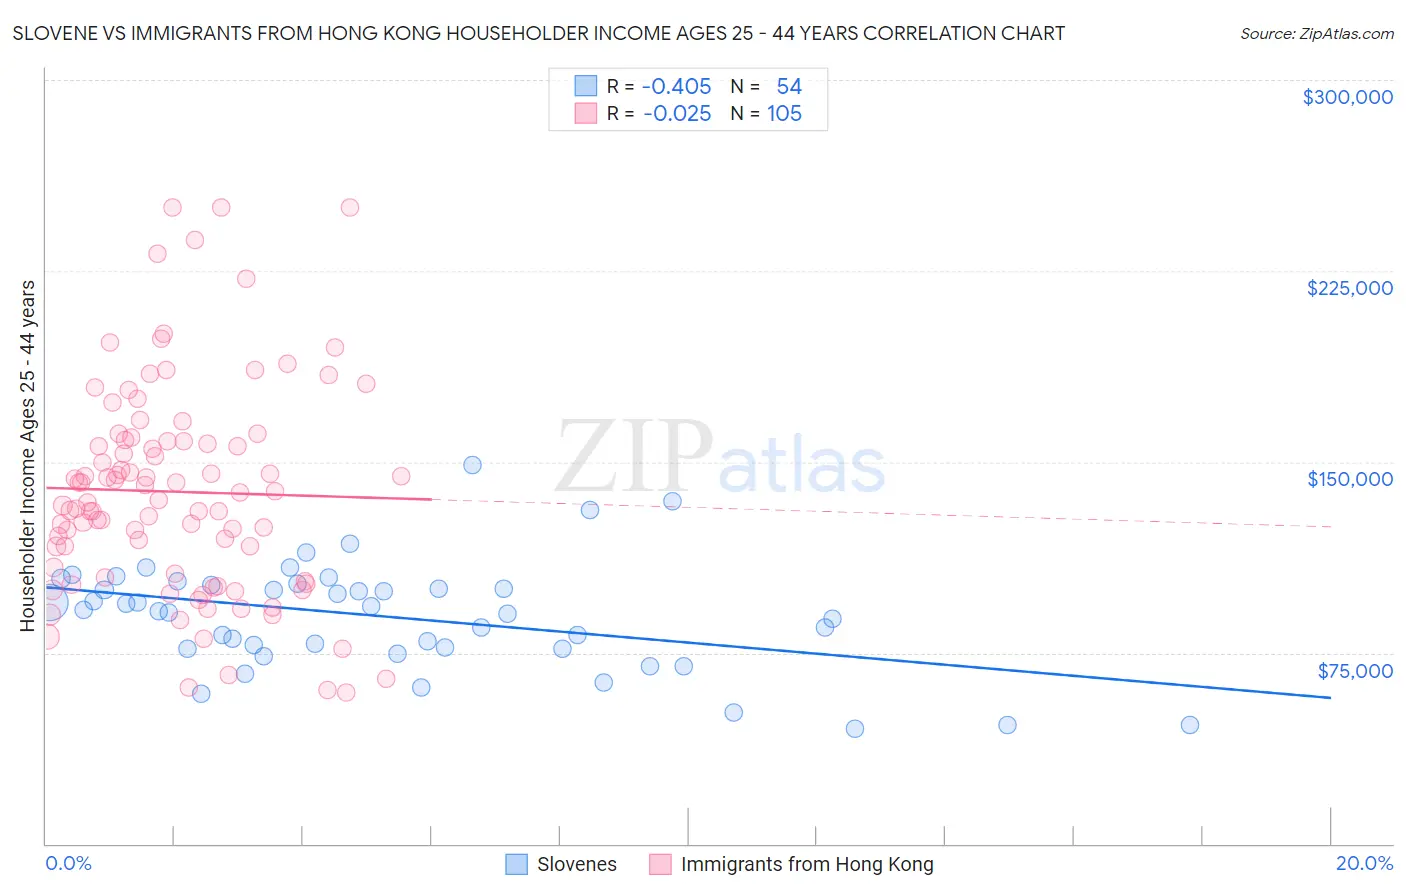 Slovene vs Immigrants from Hong Kong Householder Income Ages 25 - 44 years